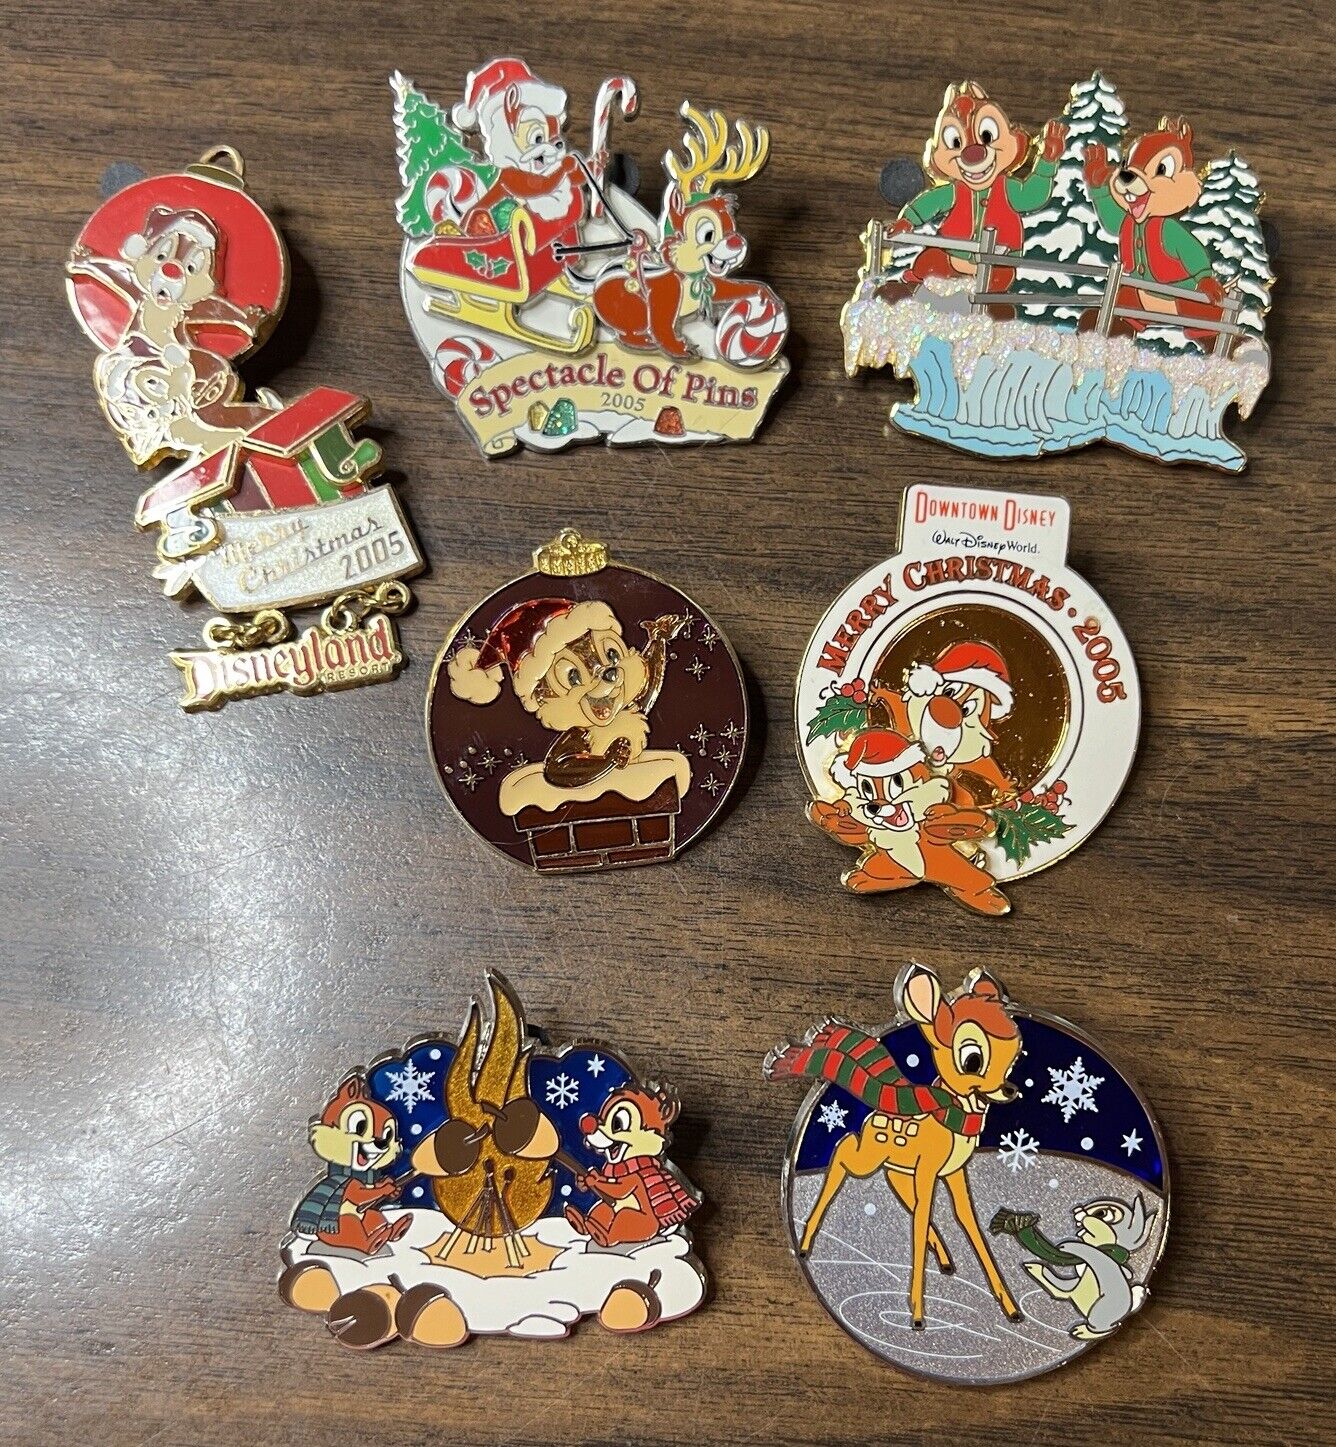 Christmas Disney Lot 7 Pins - Chip and Dale Bambi - LE 1/750 1500 3000 - DL